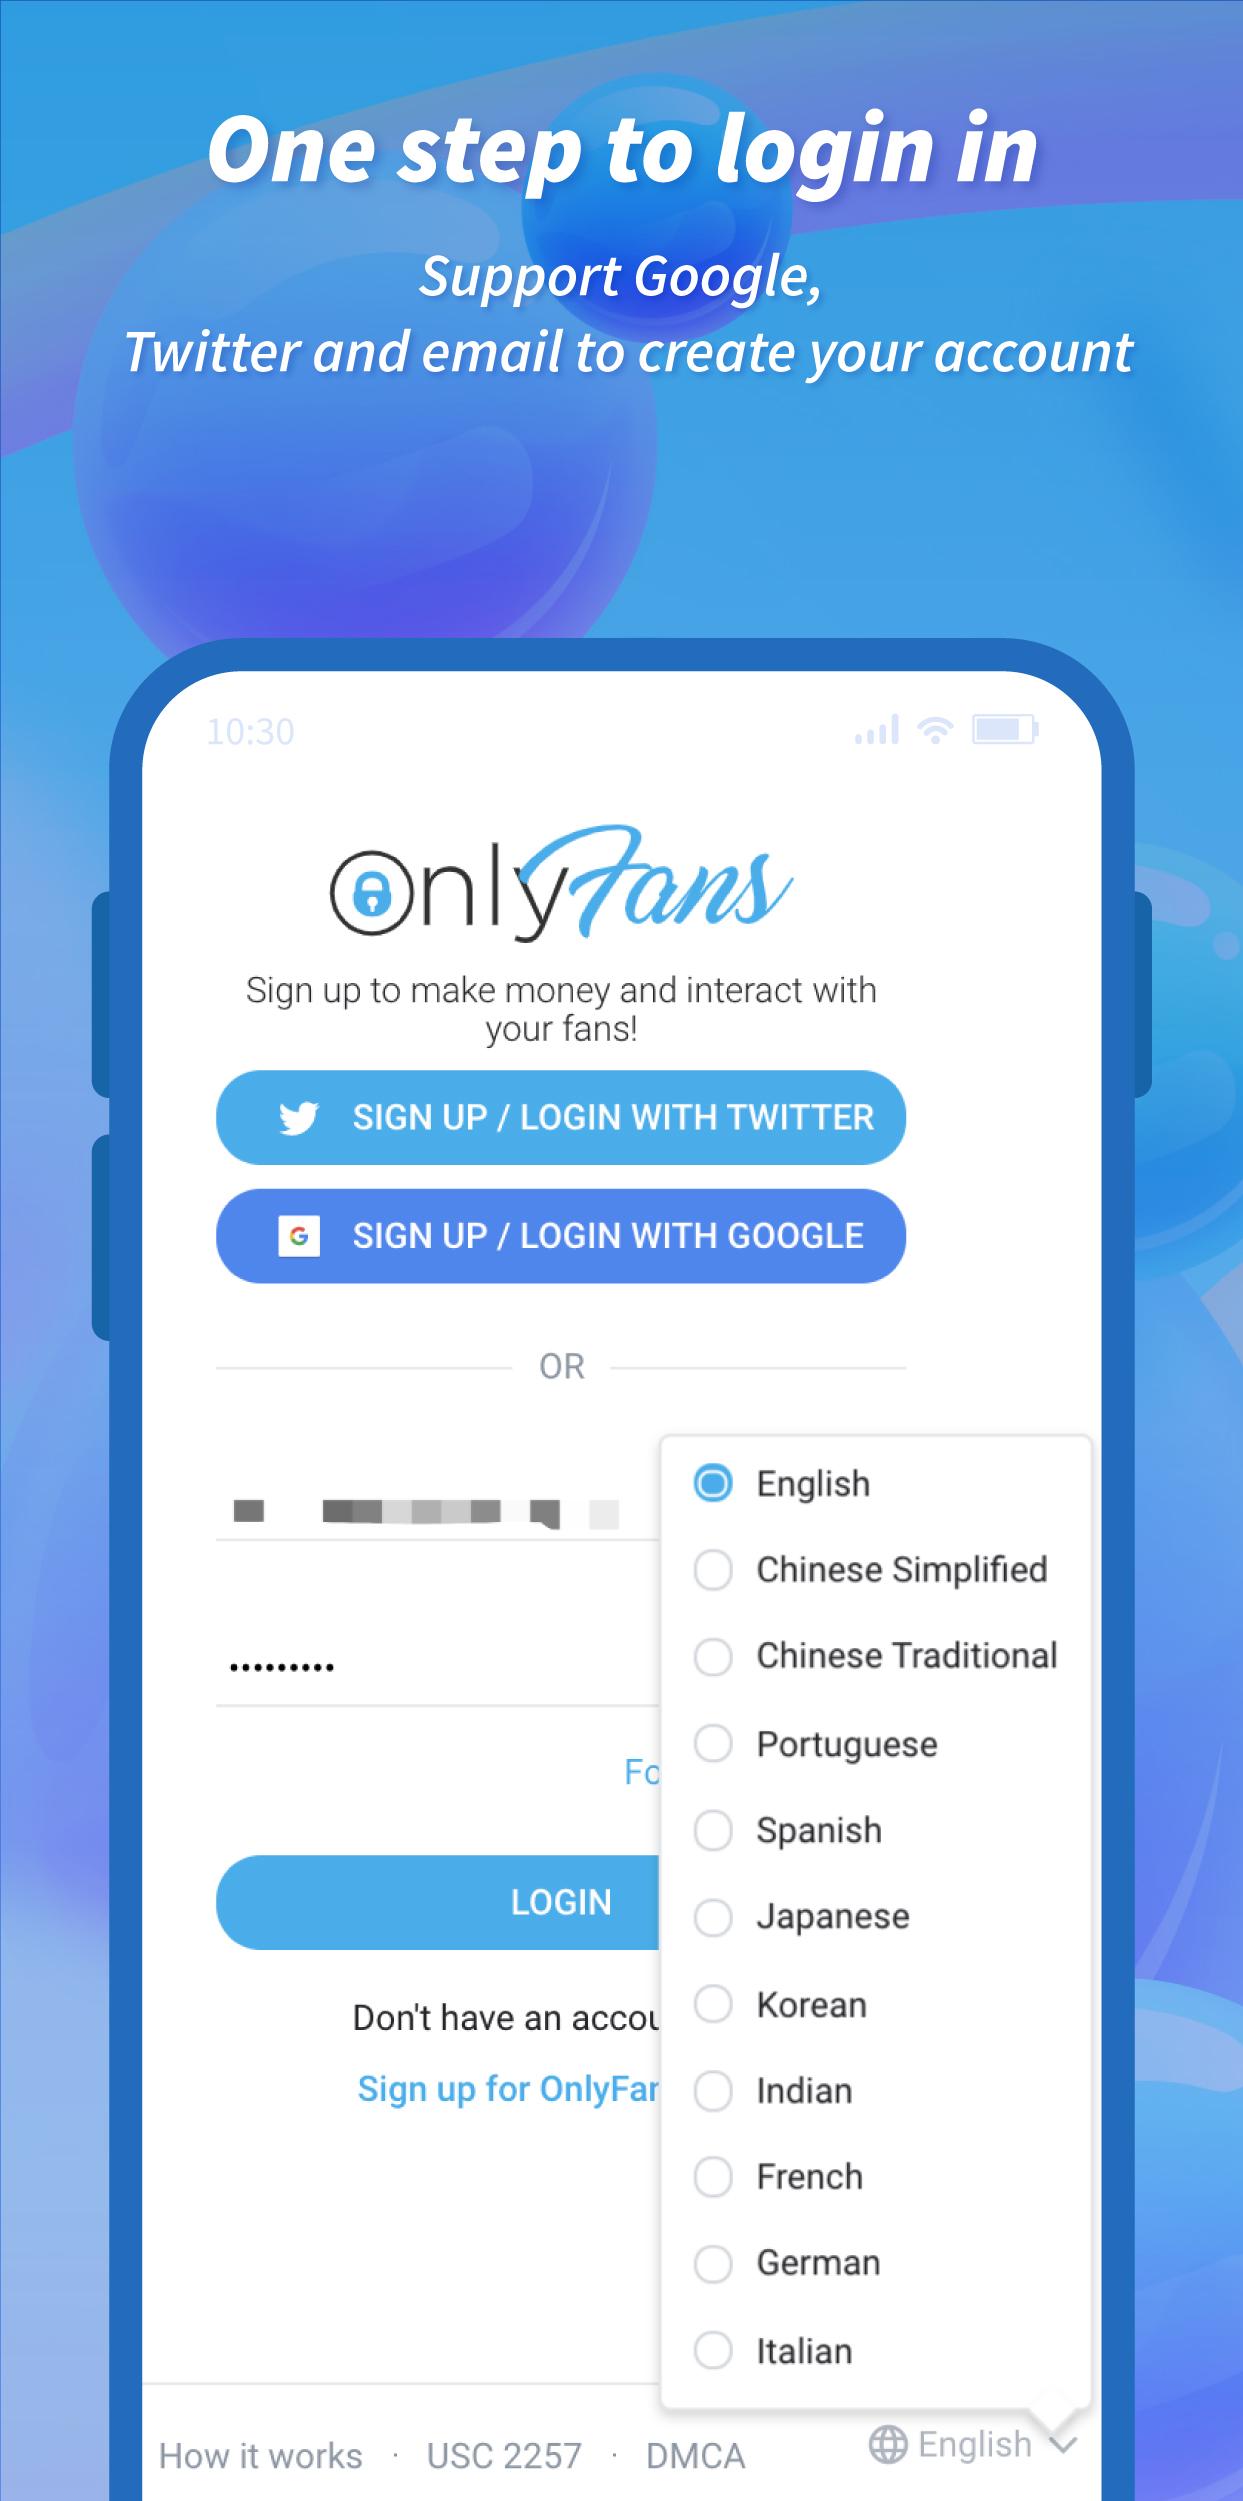 Onlyfans video downloader android